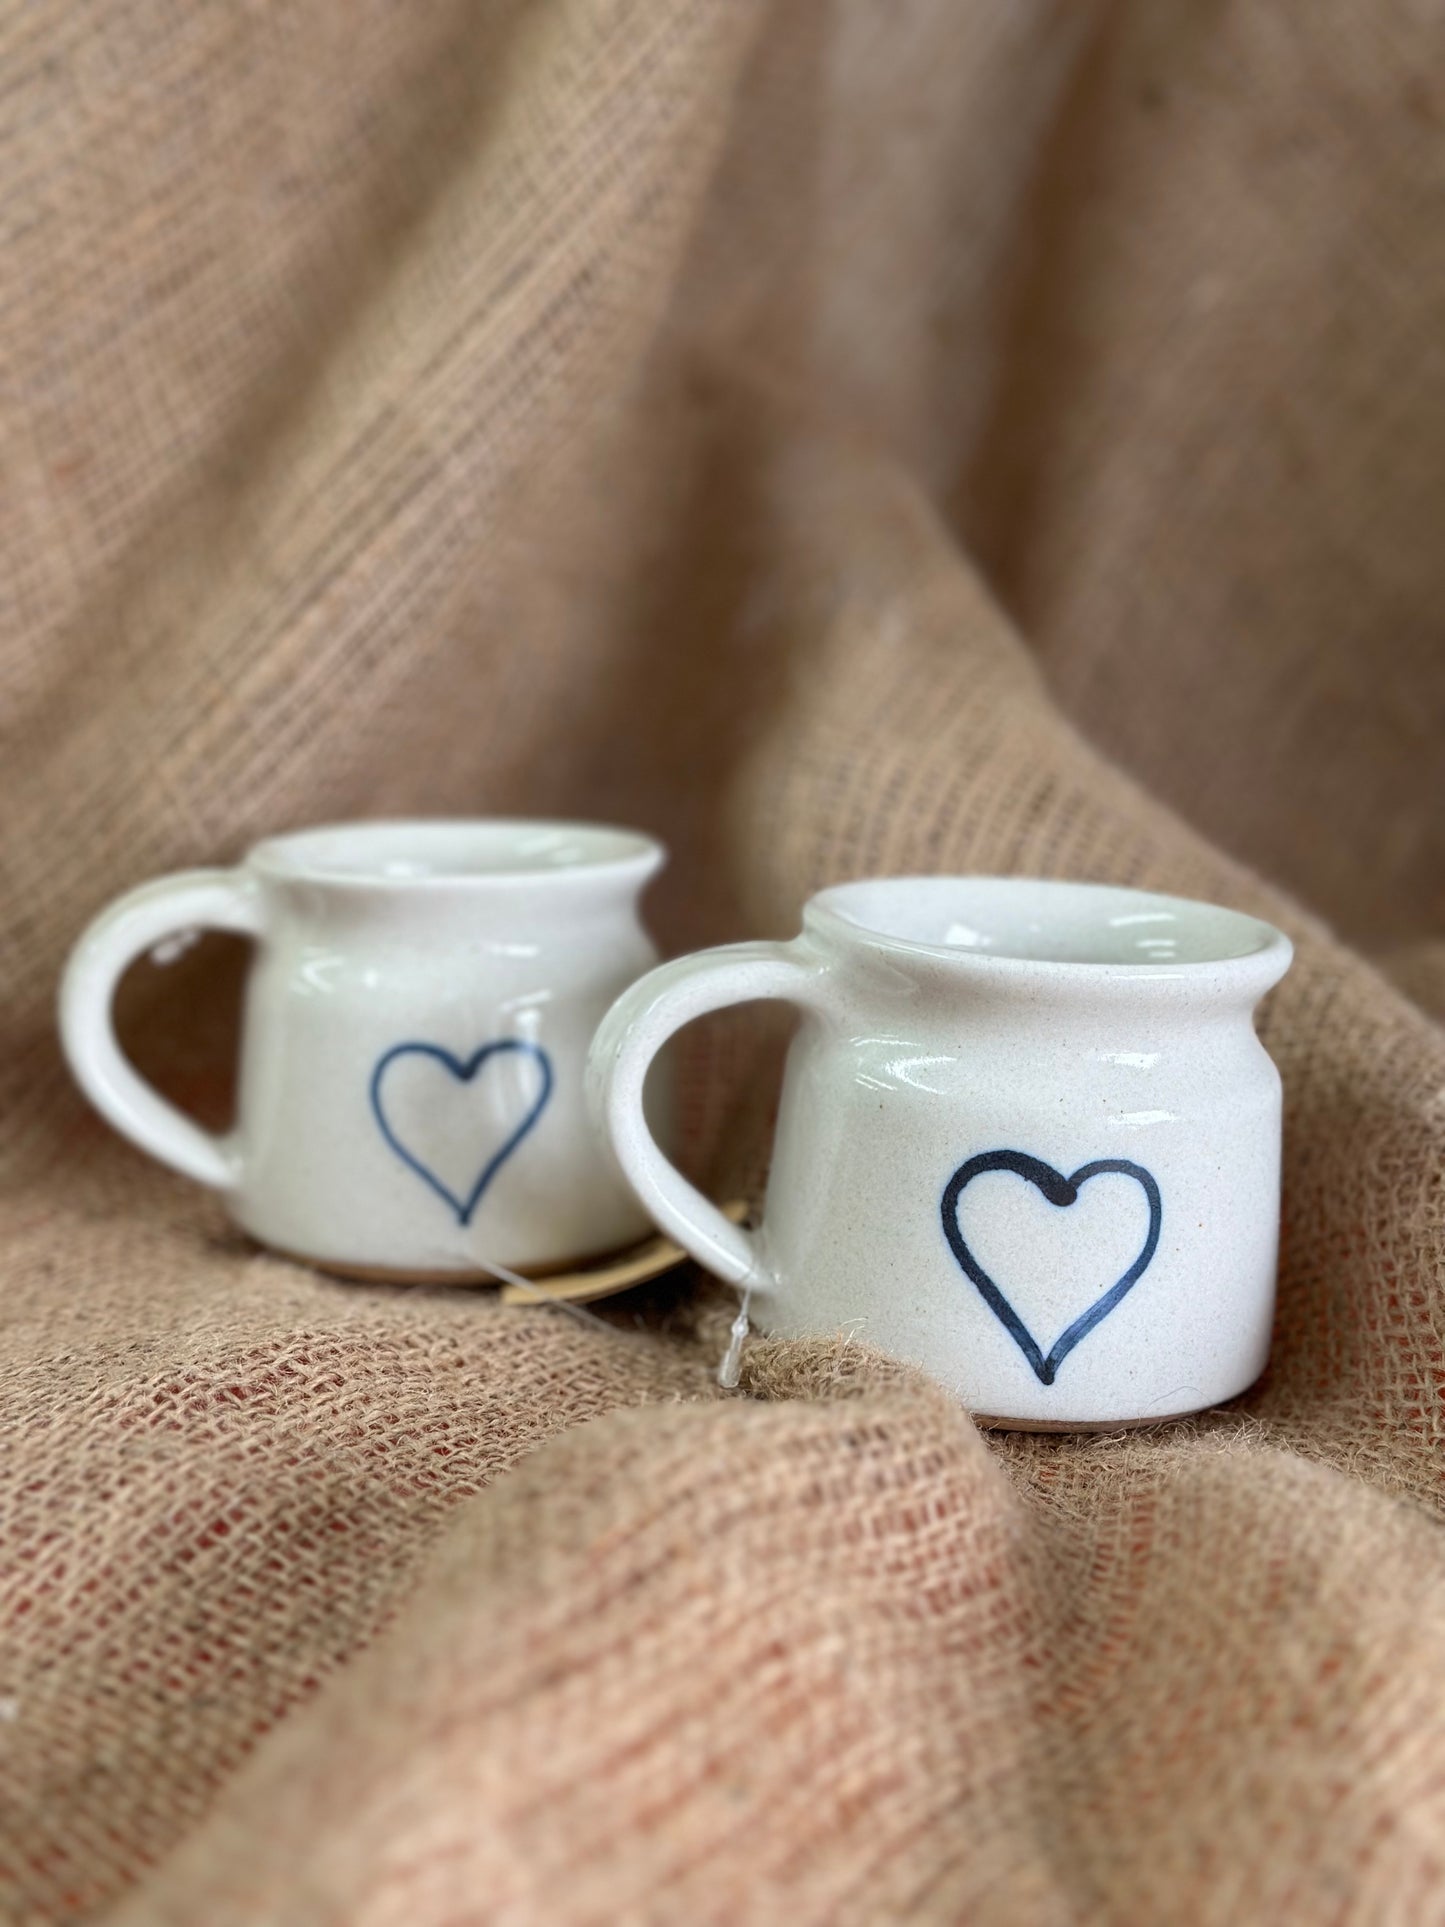 Espresso Cups Set of 2 On Bamboo Heart